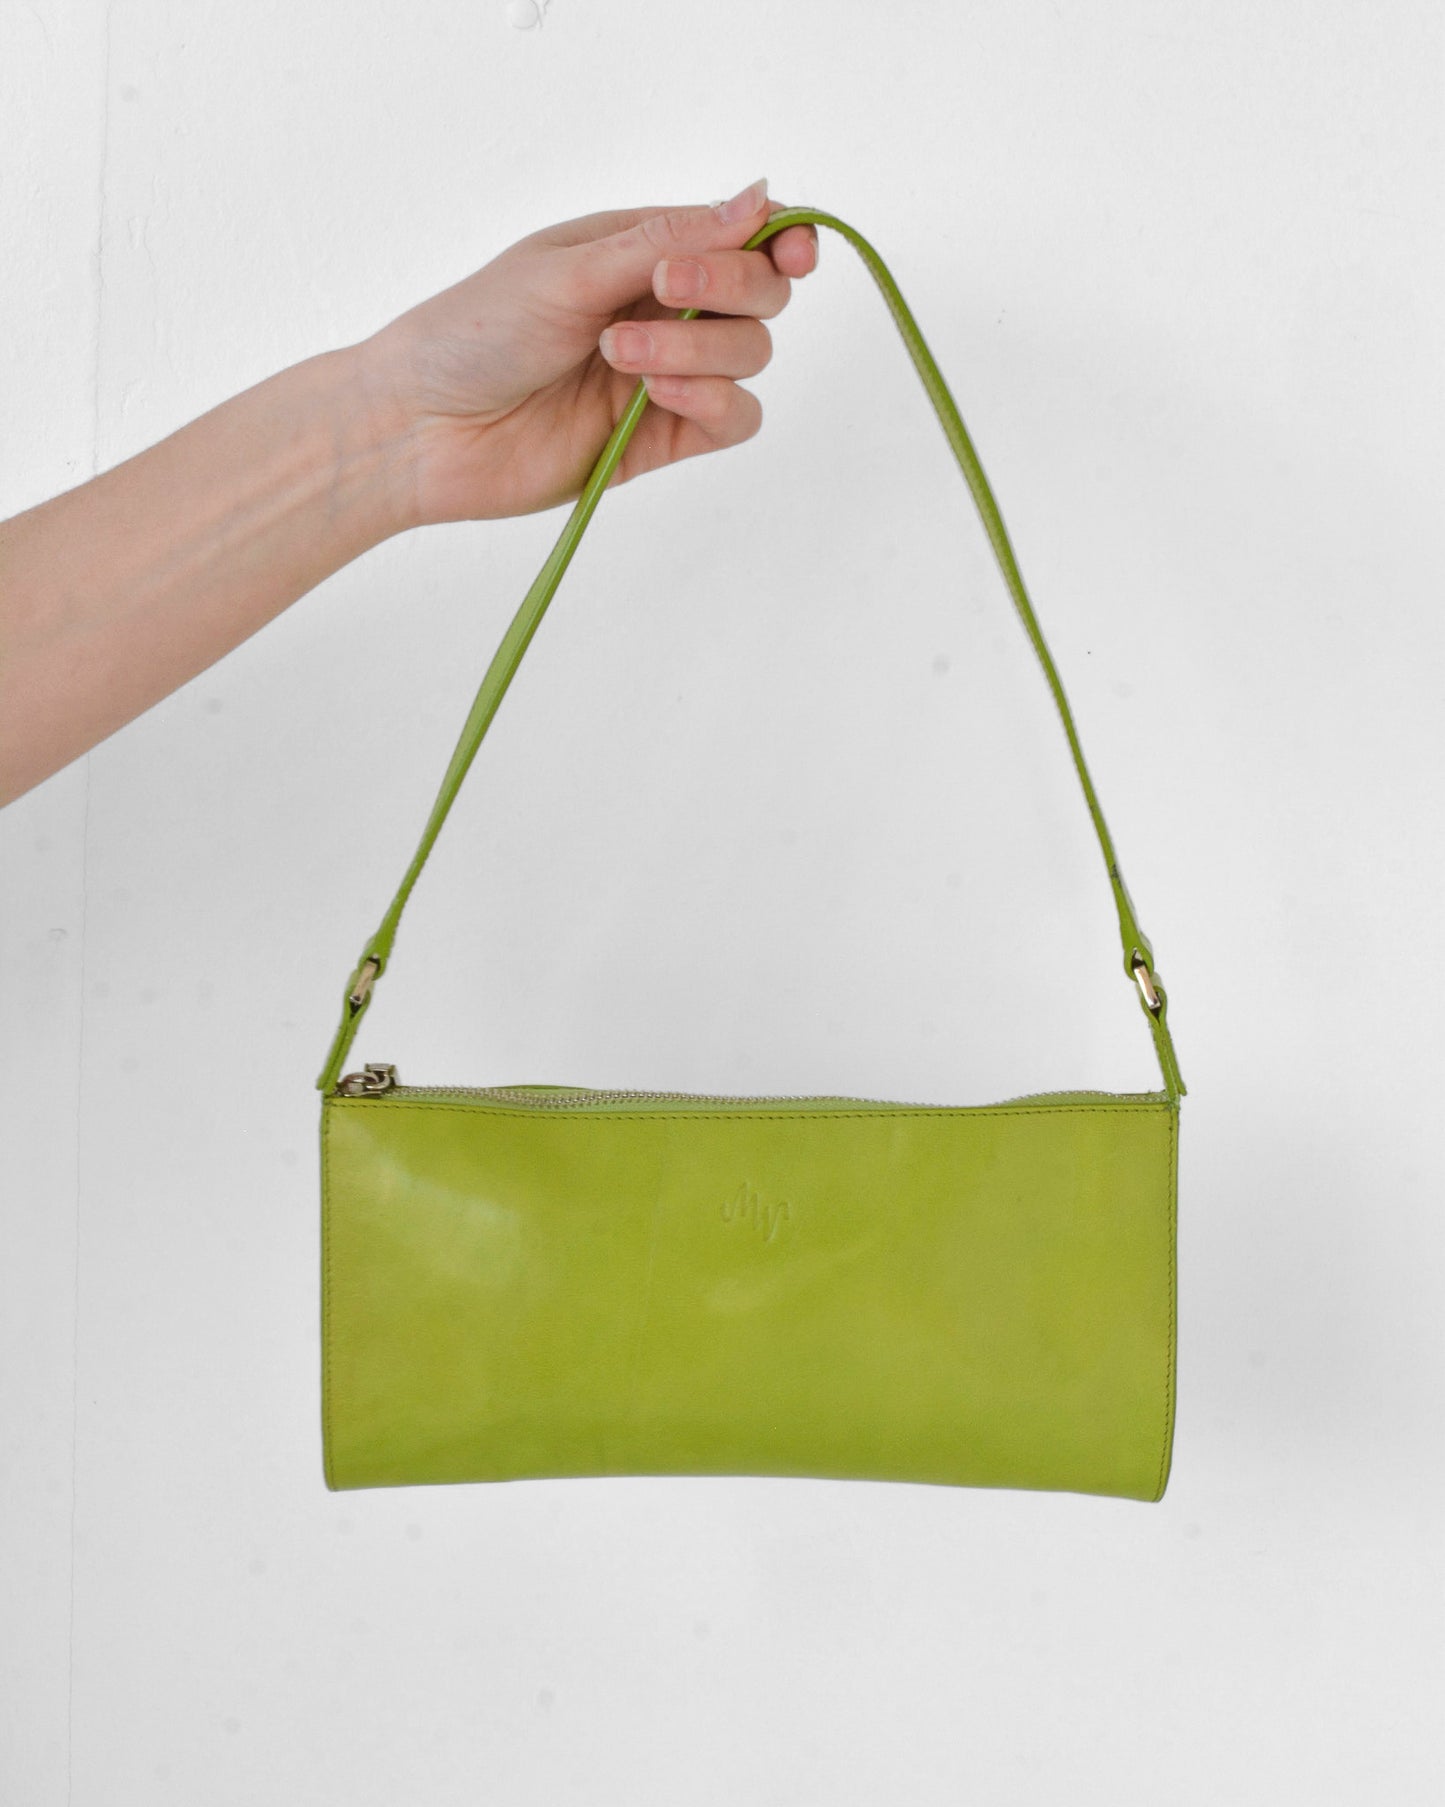 Lime Leather Purse